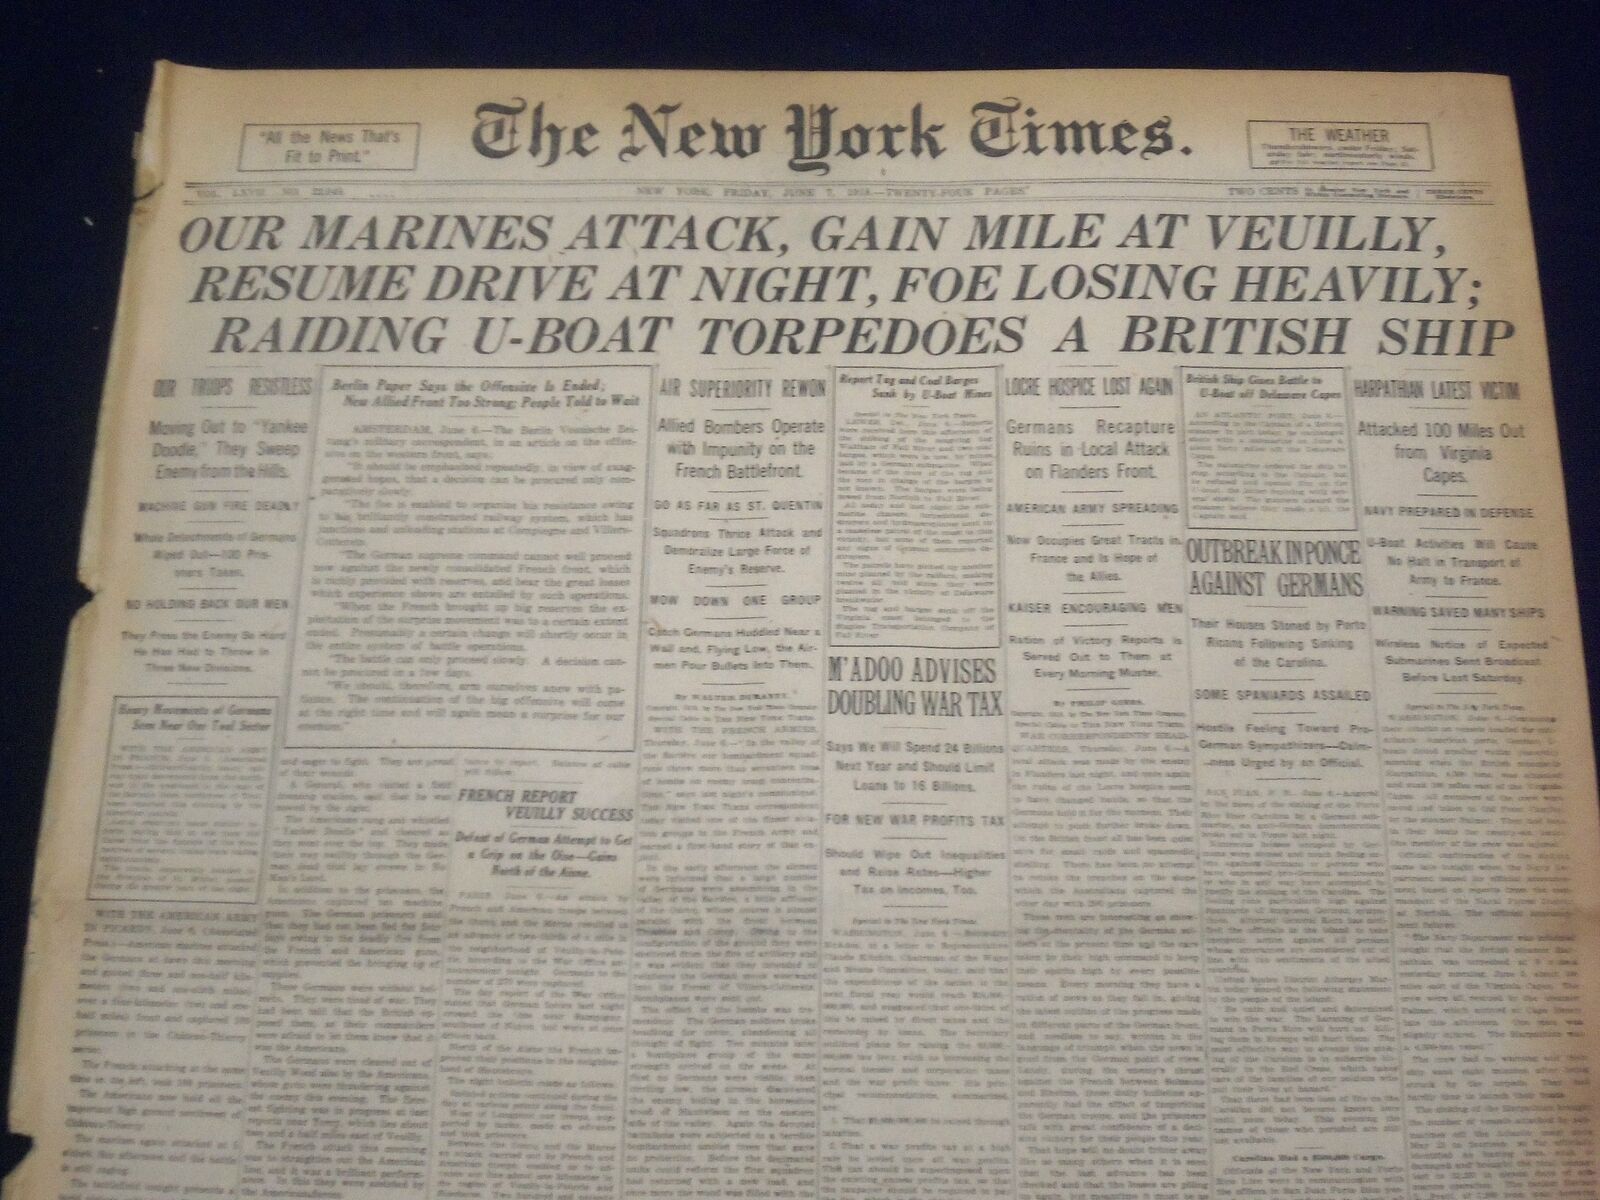 1918 JUNE 7 NEW YORK TIMES - OUR MARINES ATTACK AT VEUILLY - NT 9080